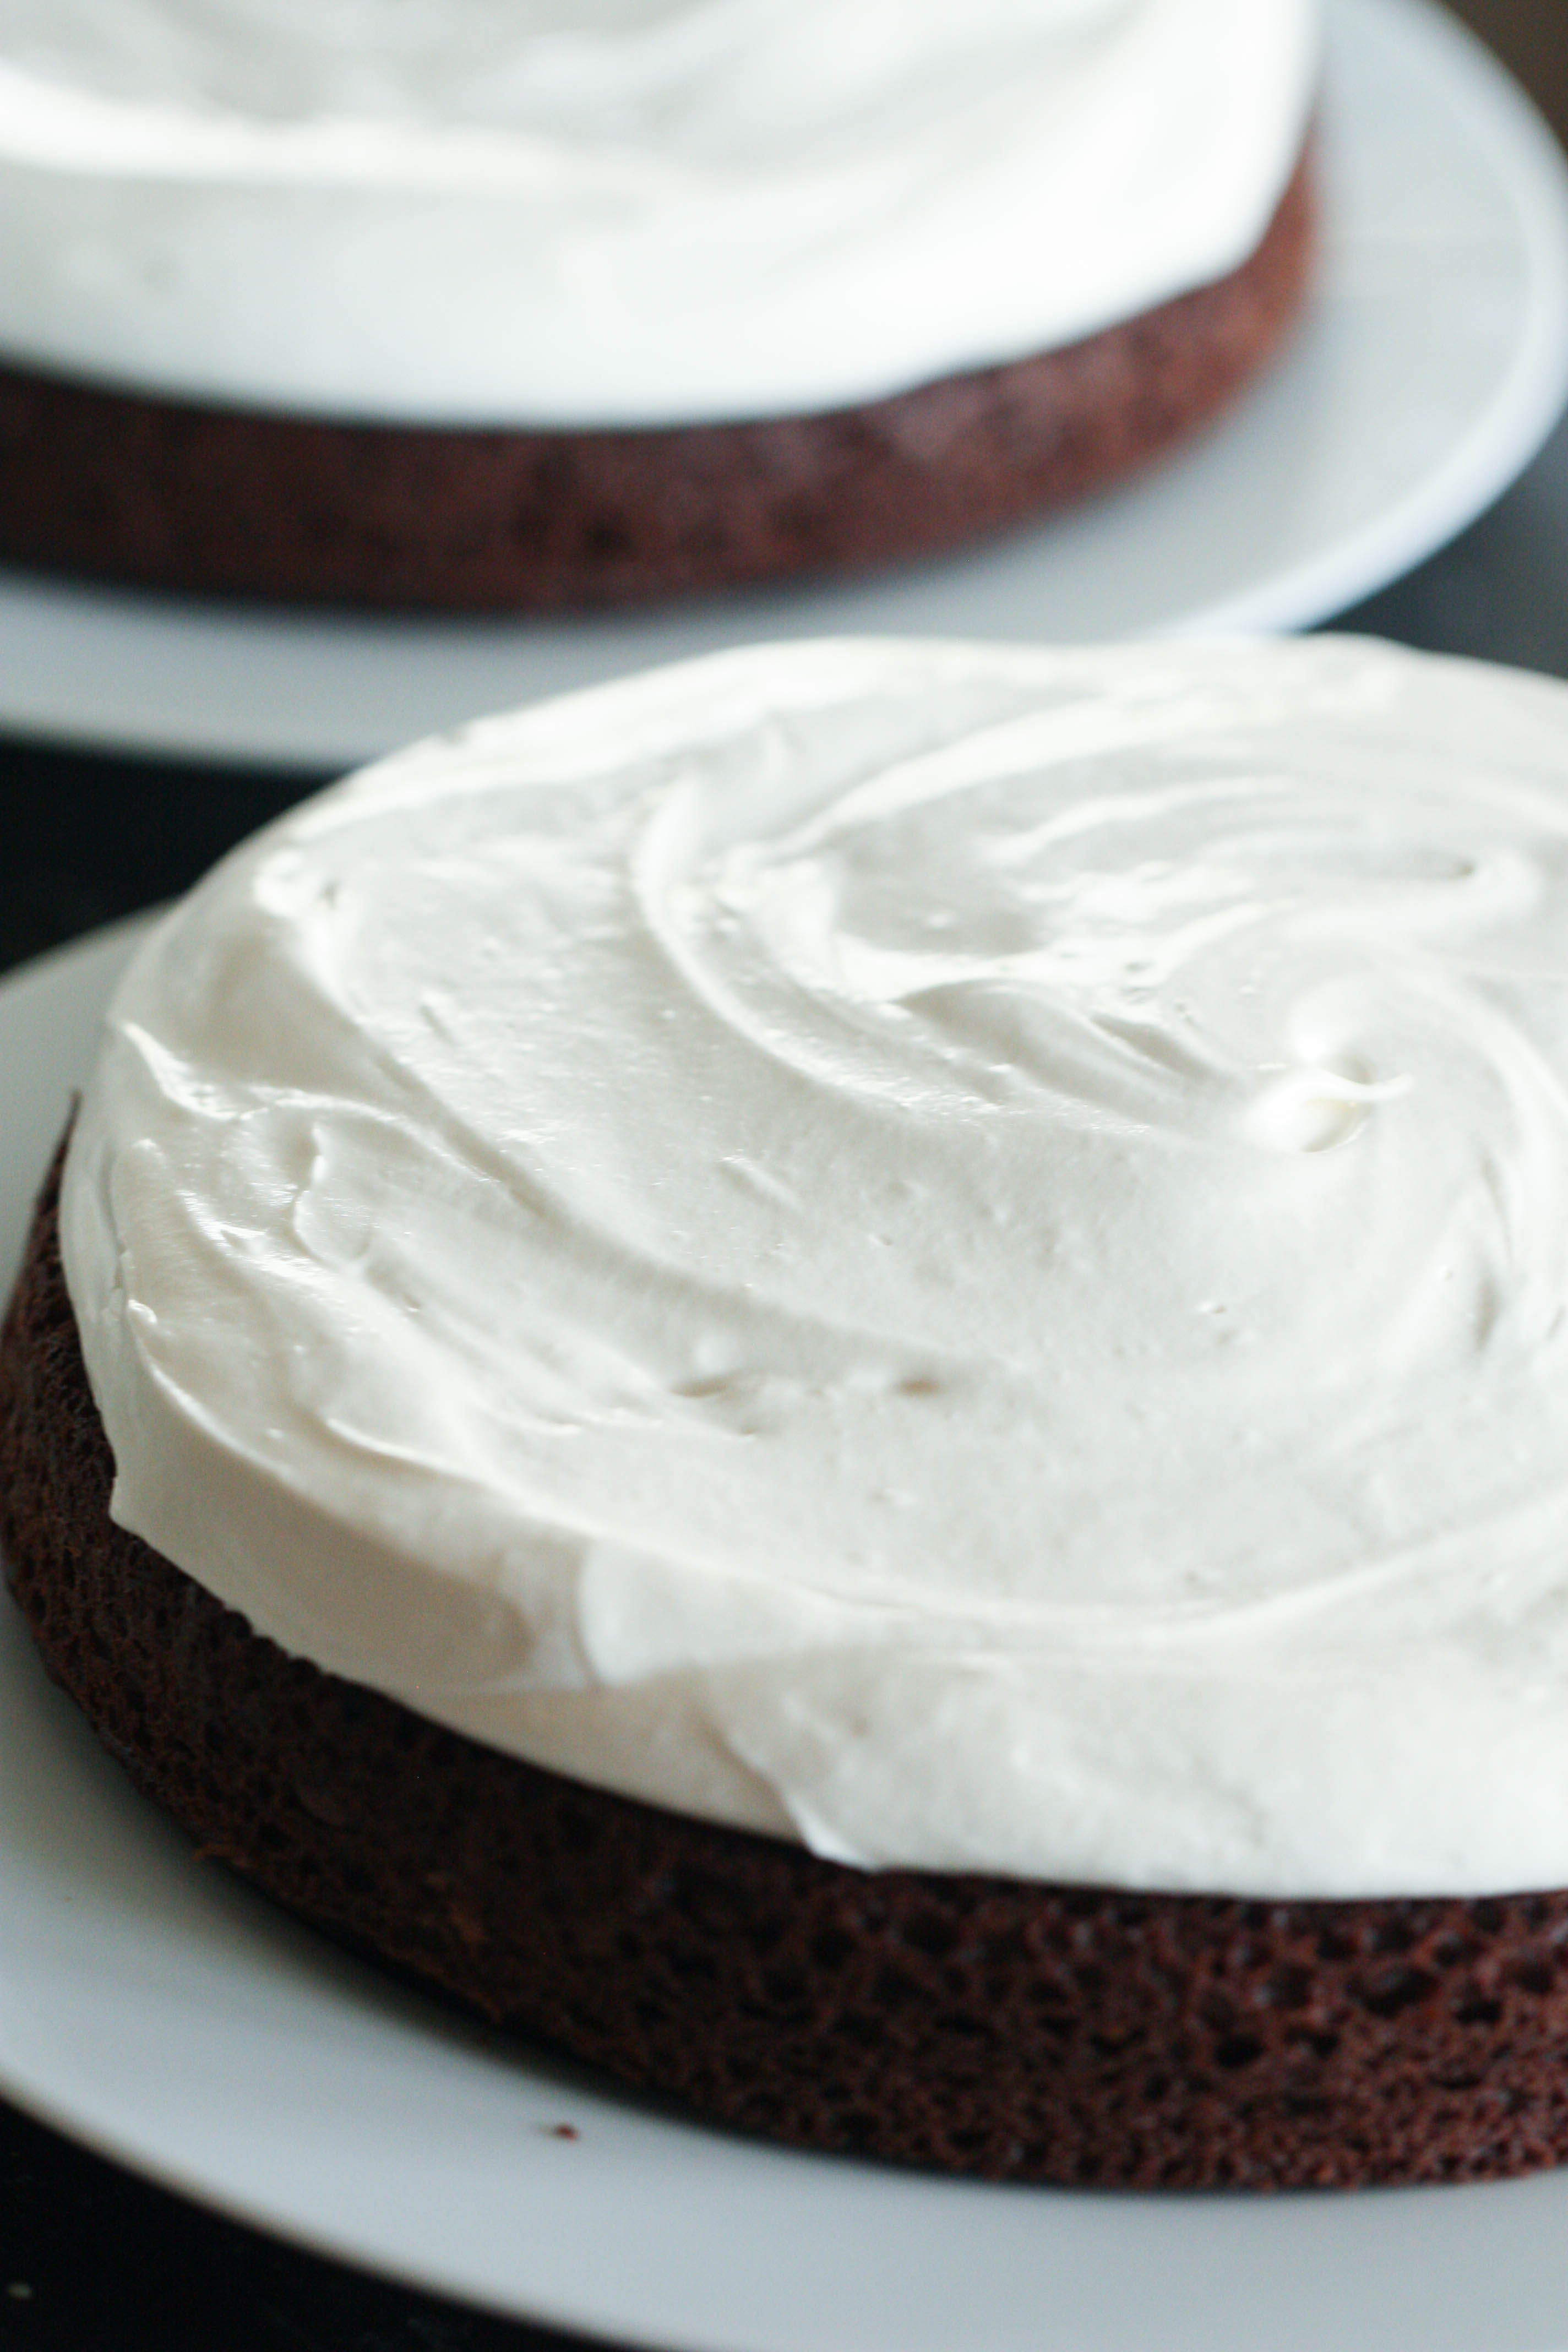 Black forest cake with frosting